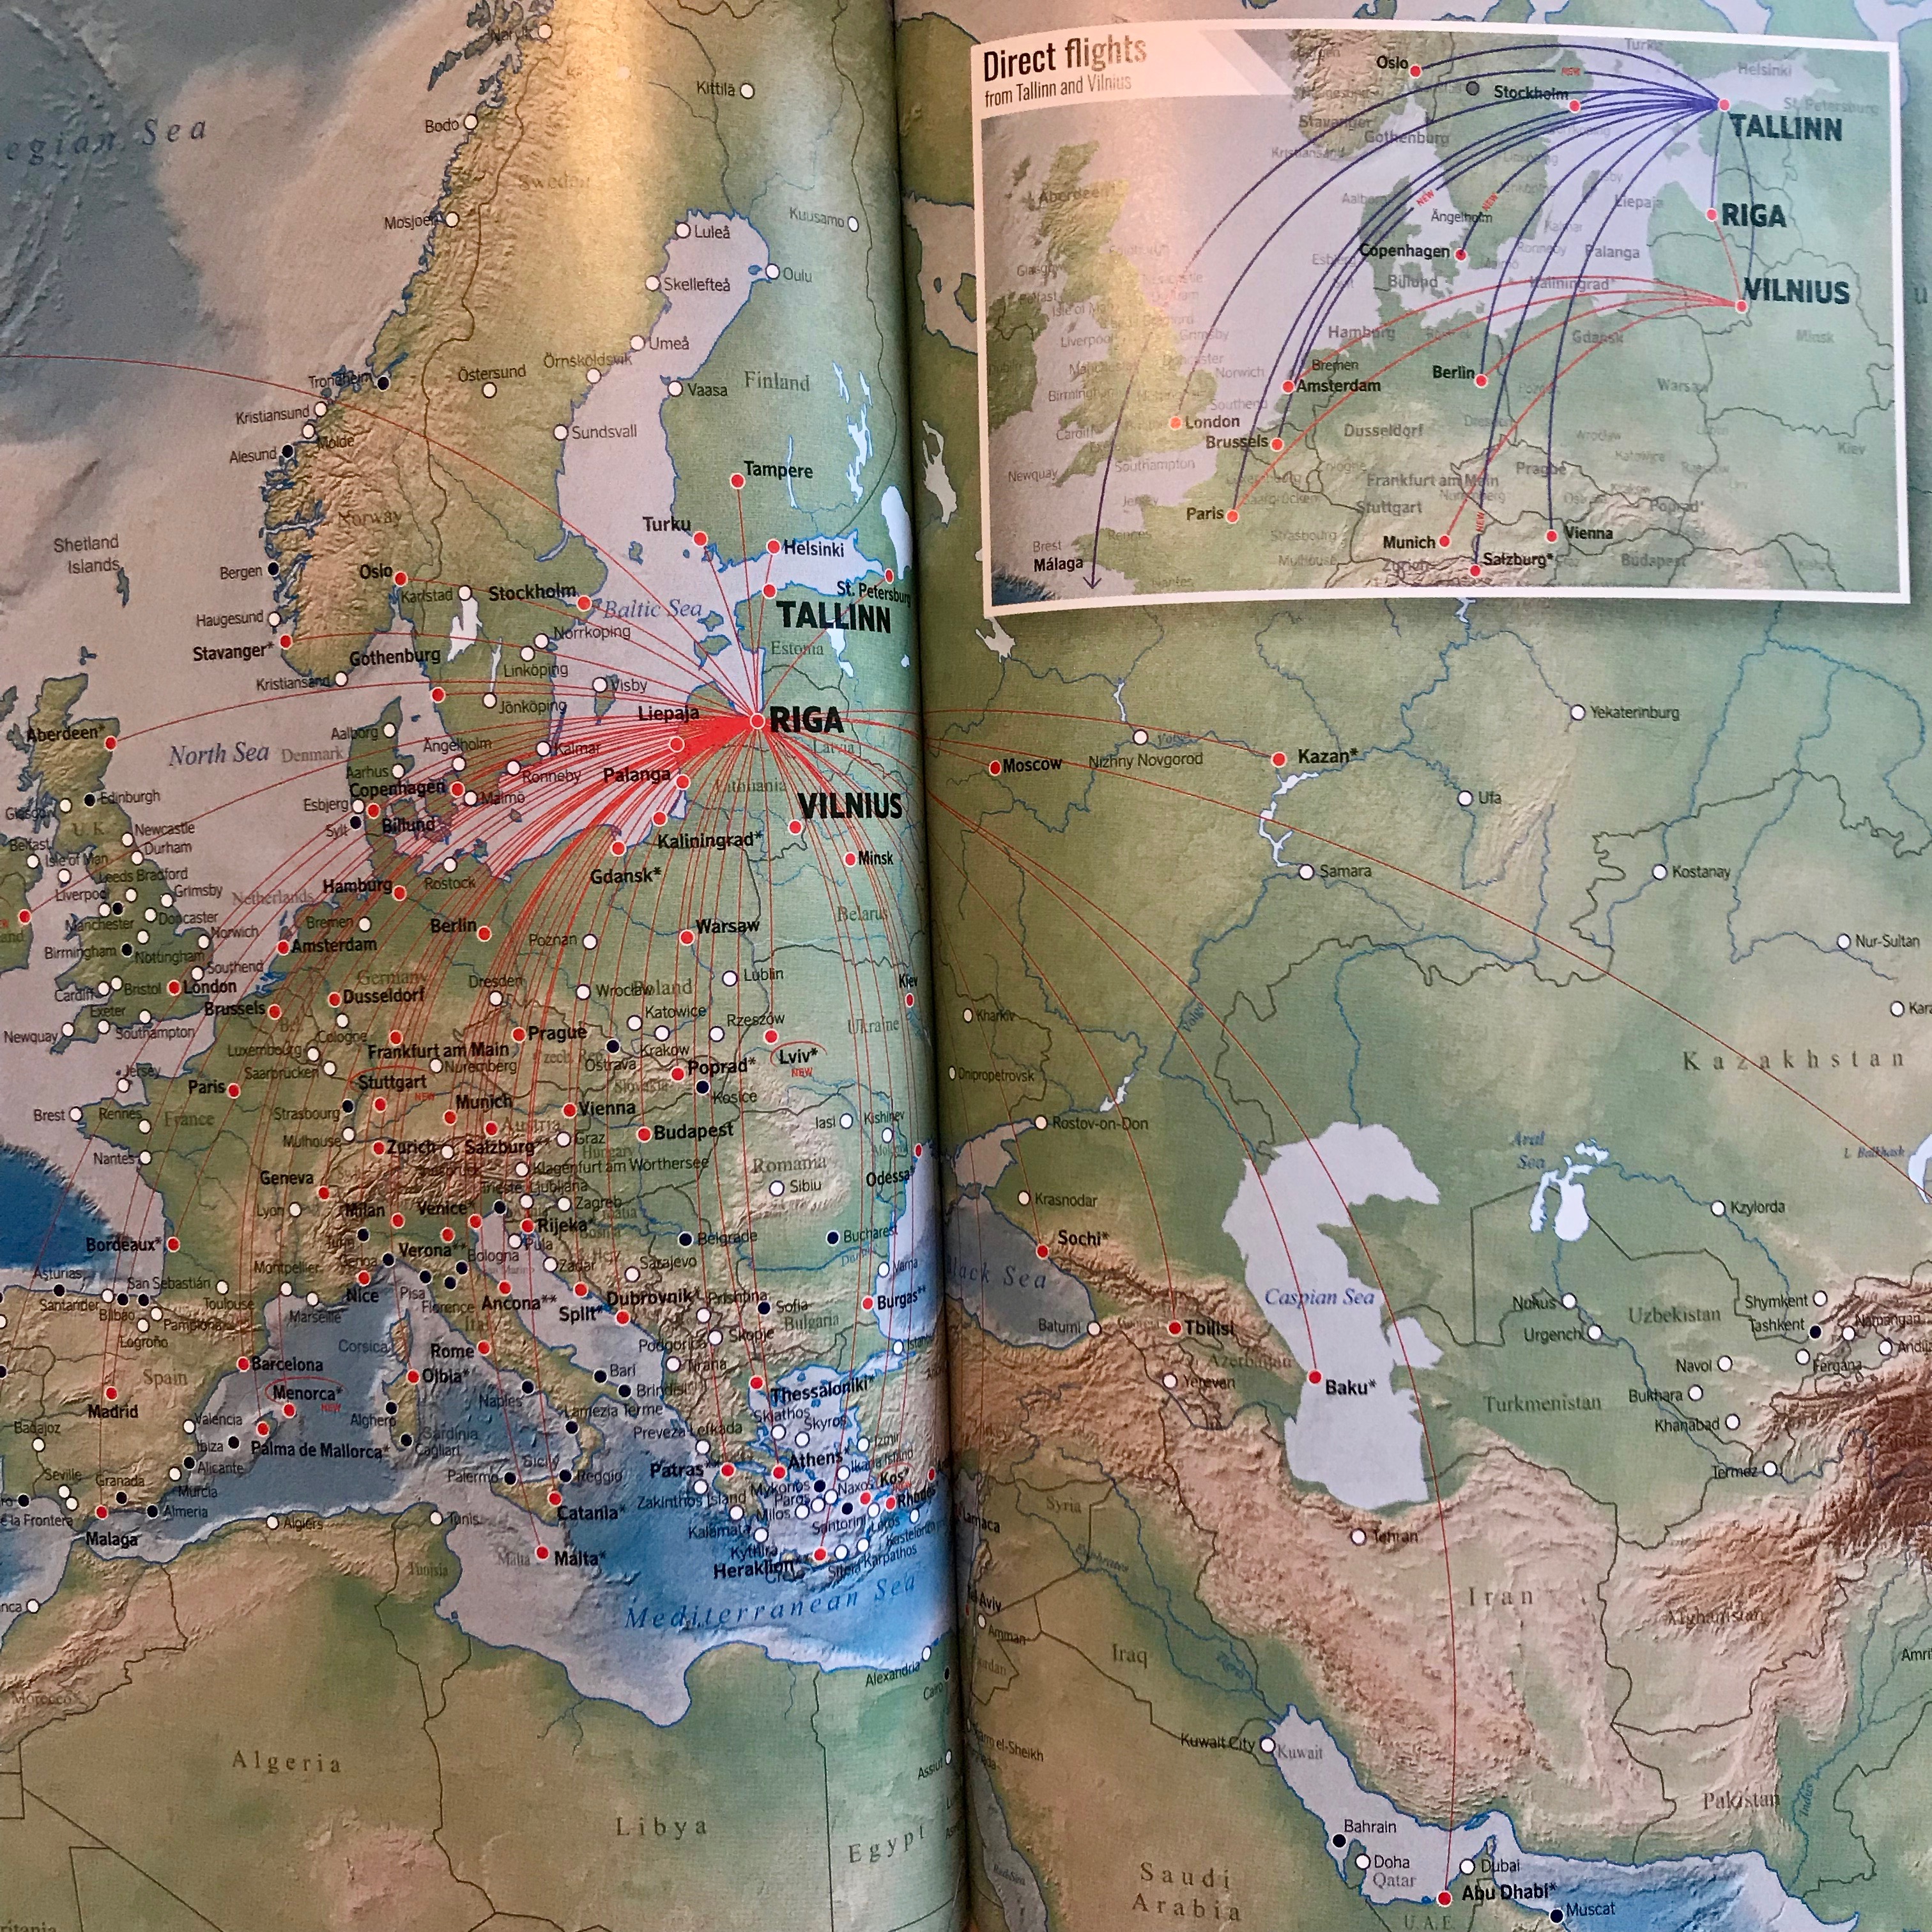 This airBaltic route map is located in the airline in-flight magazine.  There are many dots on the map of various colors depicting the various destinations for the airline, including lines between the prominent hub of Riga, Latvia and each point on the map.  